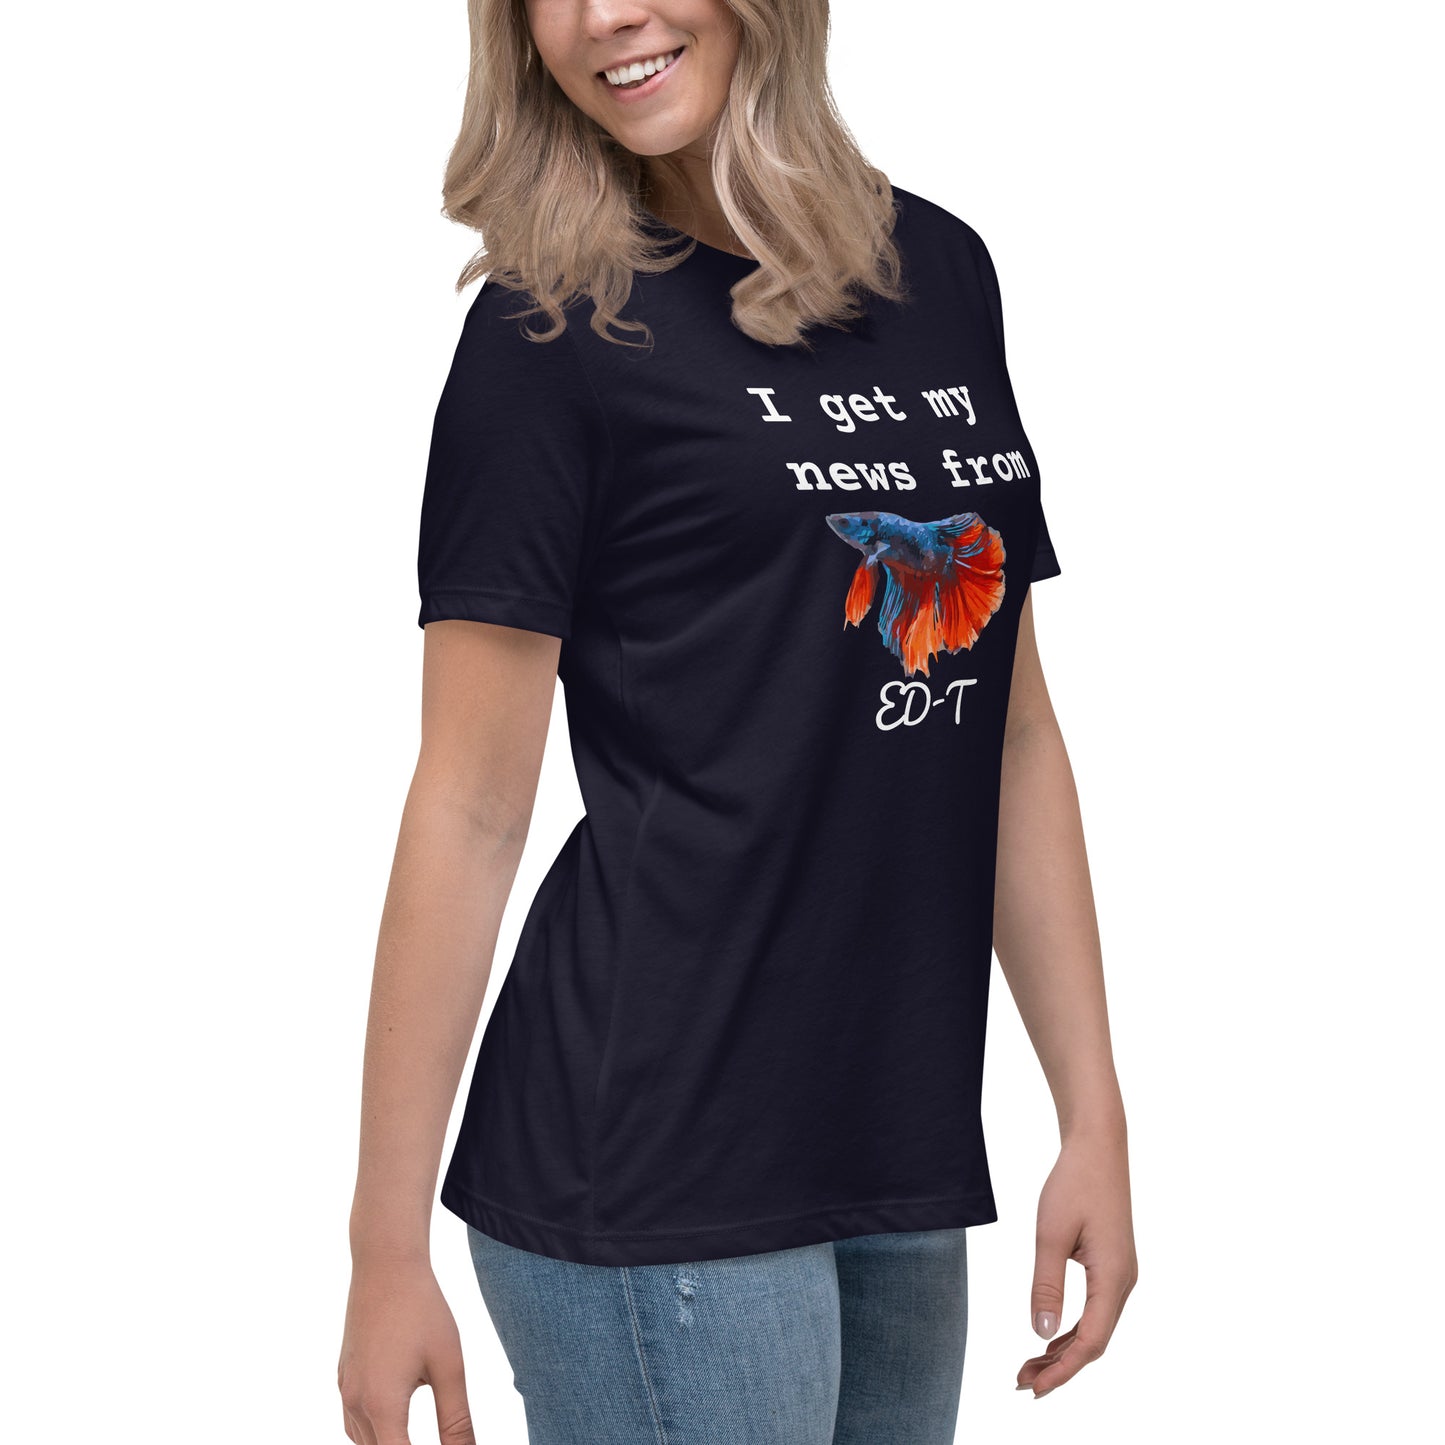 I get my news from ED-T Women's T-shirt